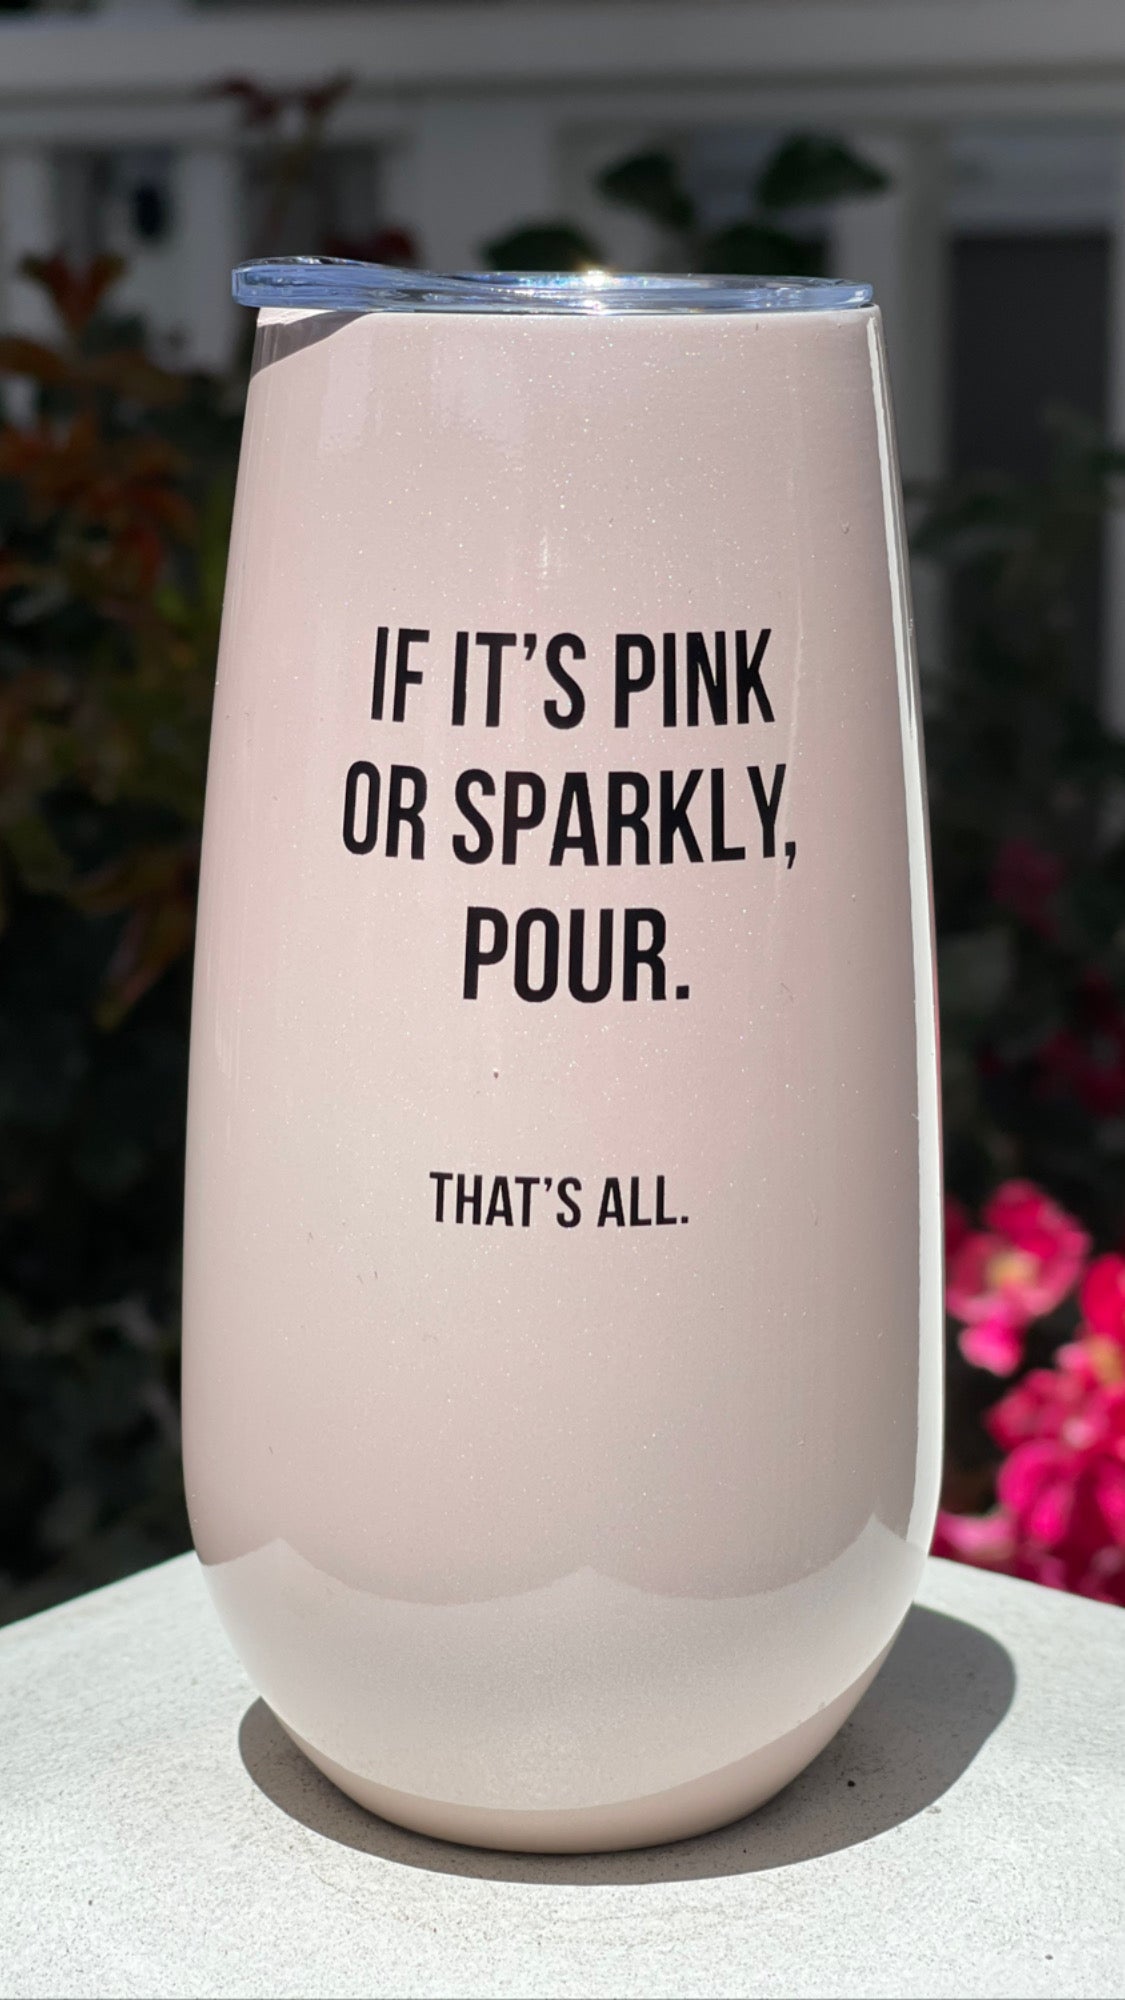 That's All ®Champagne Tumbler- It it's pink or sparkly, pour